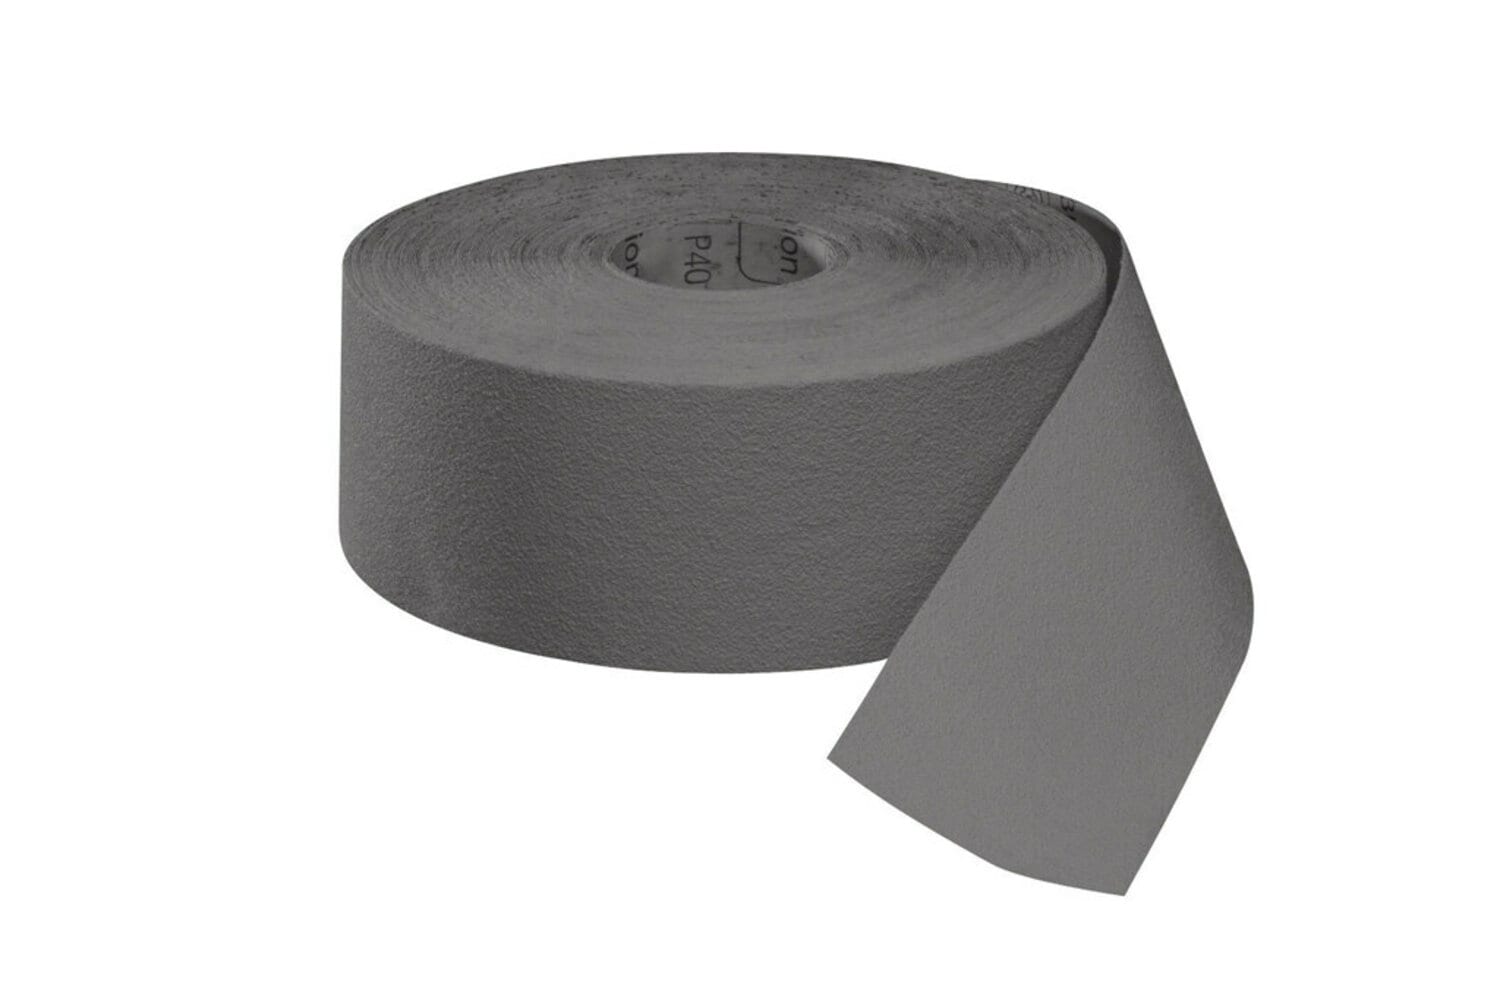 7100070188 - 3M Wetordry Paper Roll 431Q, 240 C-weight, Config